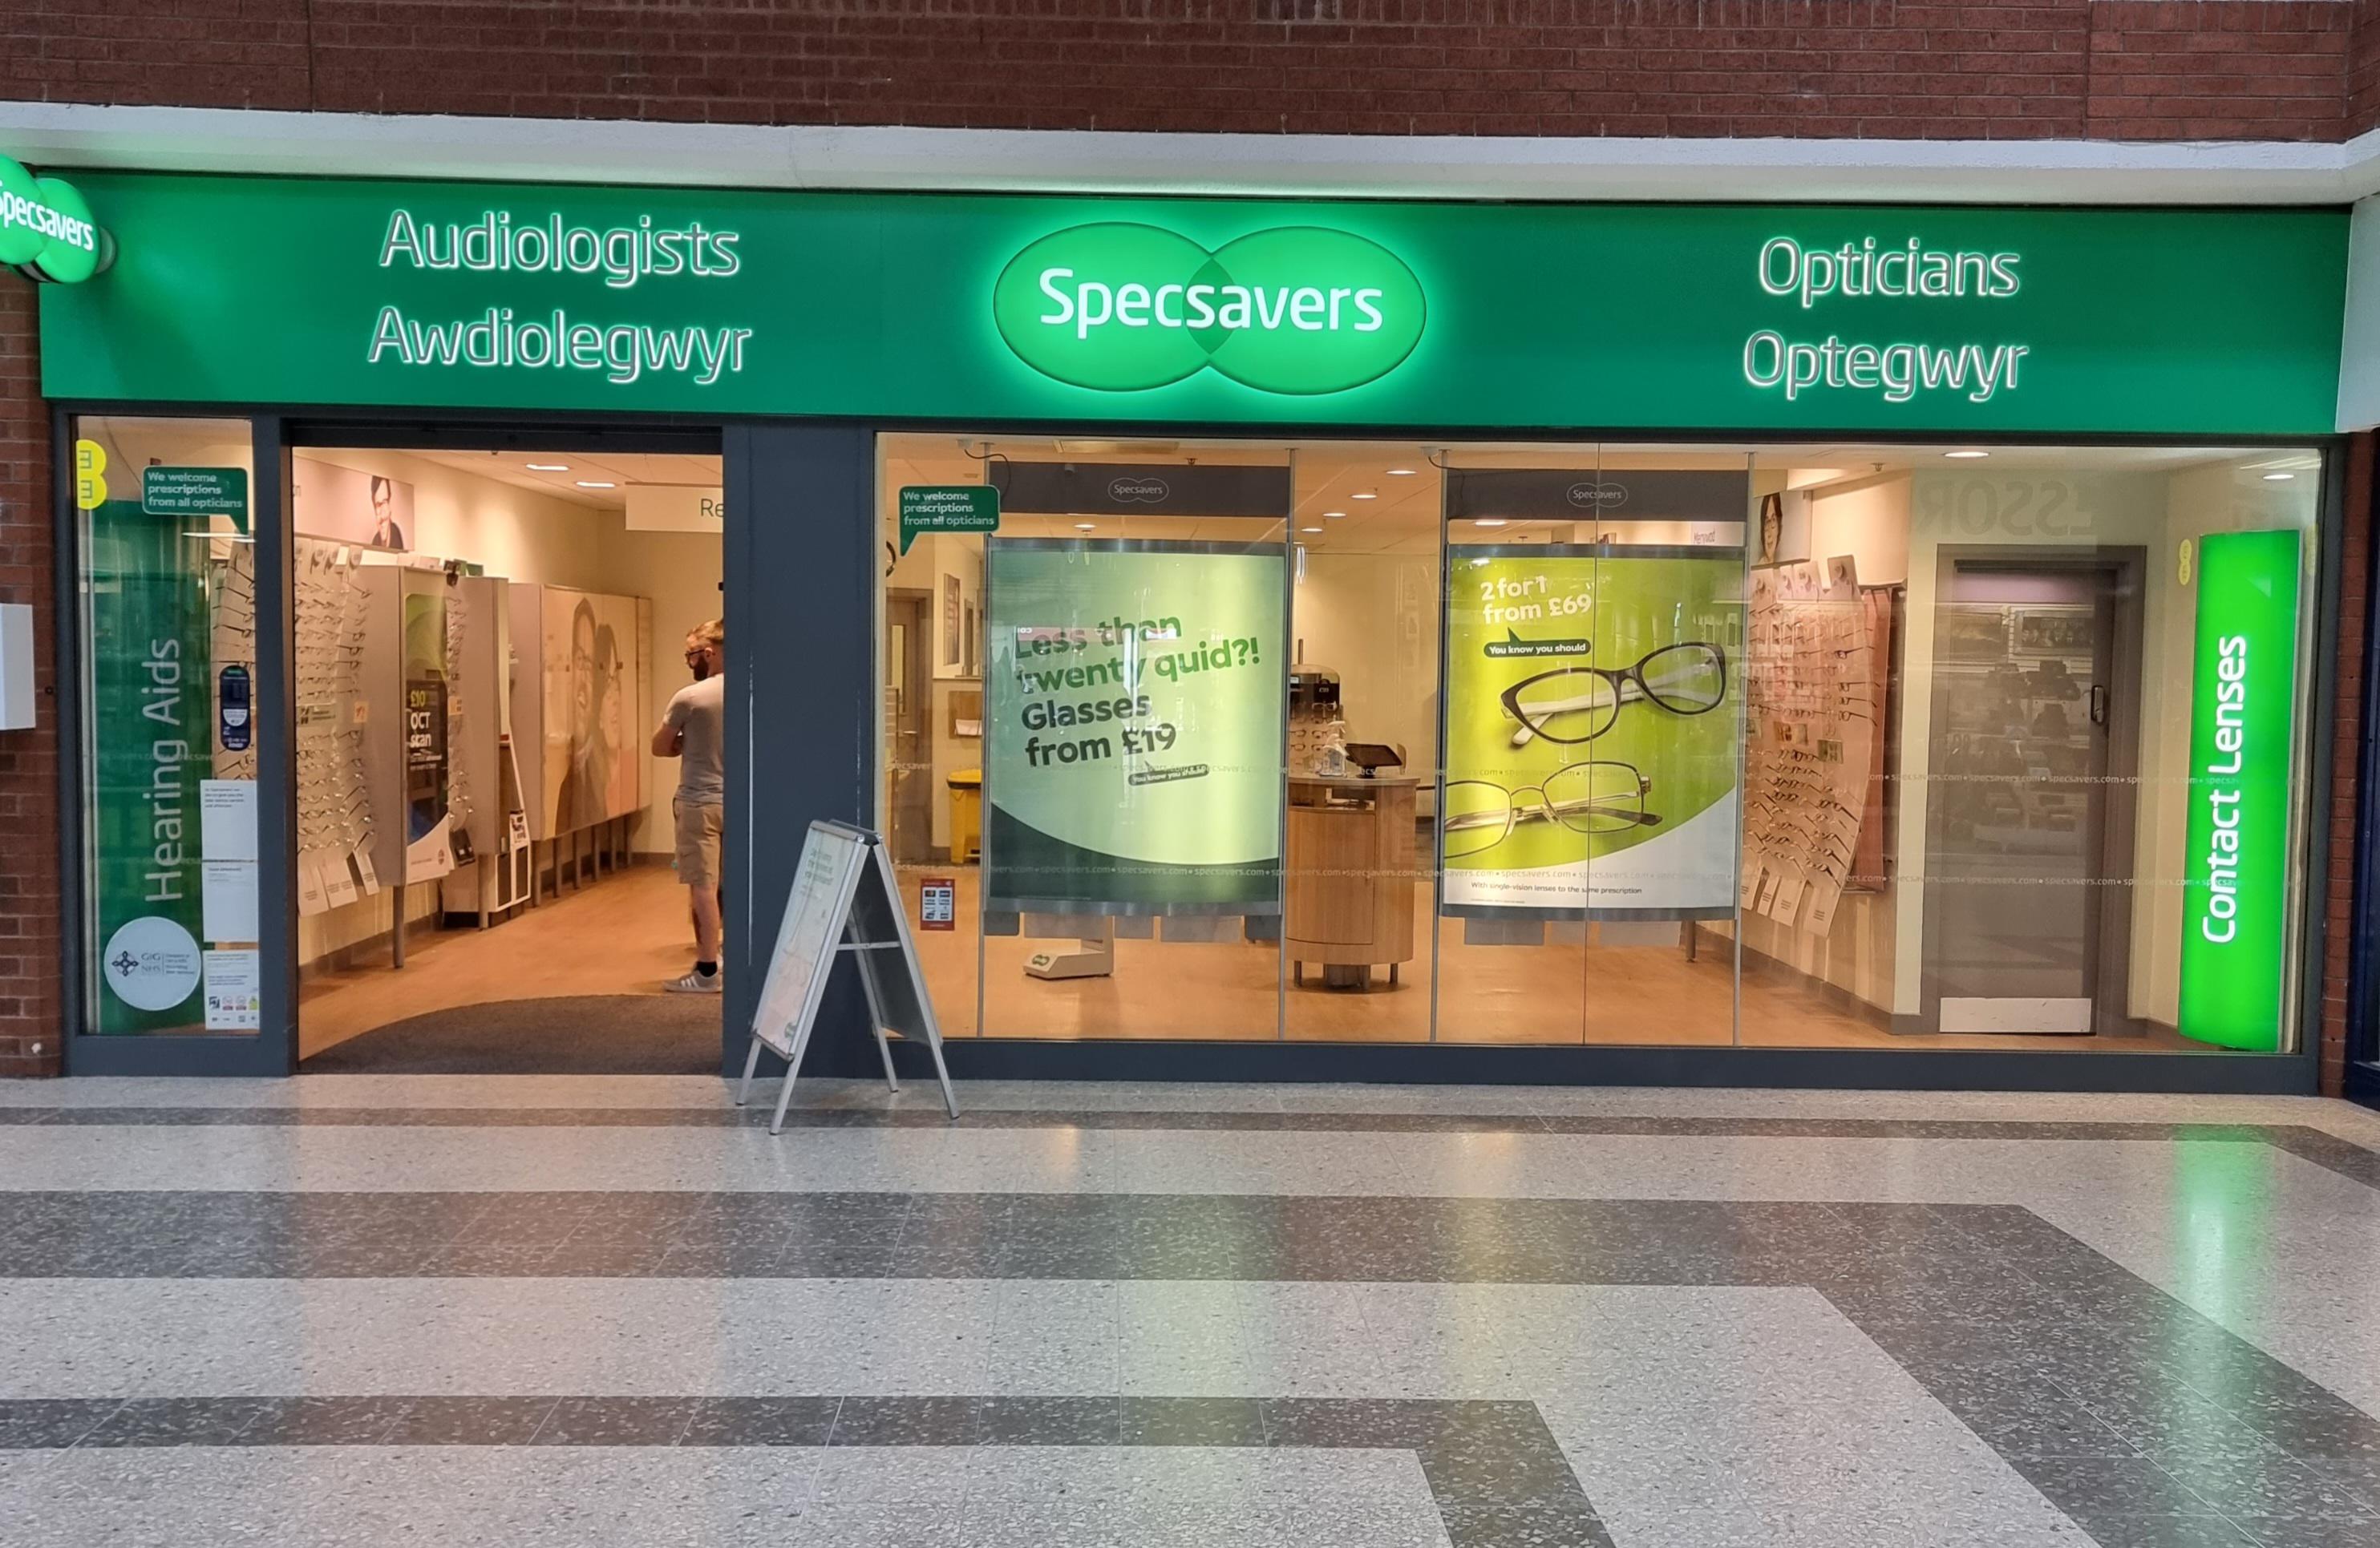 Images Specsavers Opticians and Audiologists - Rhyl